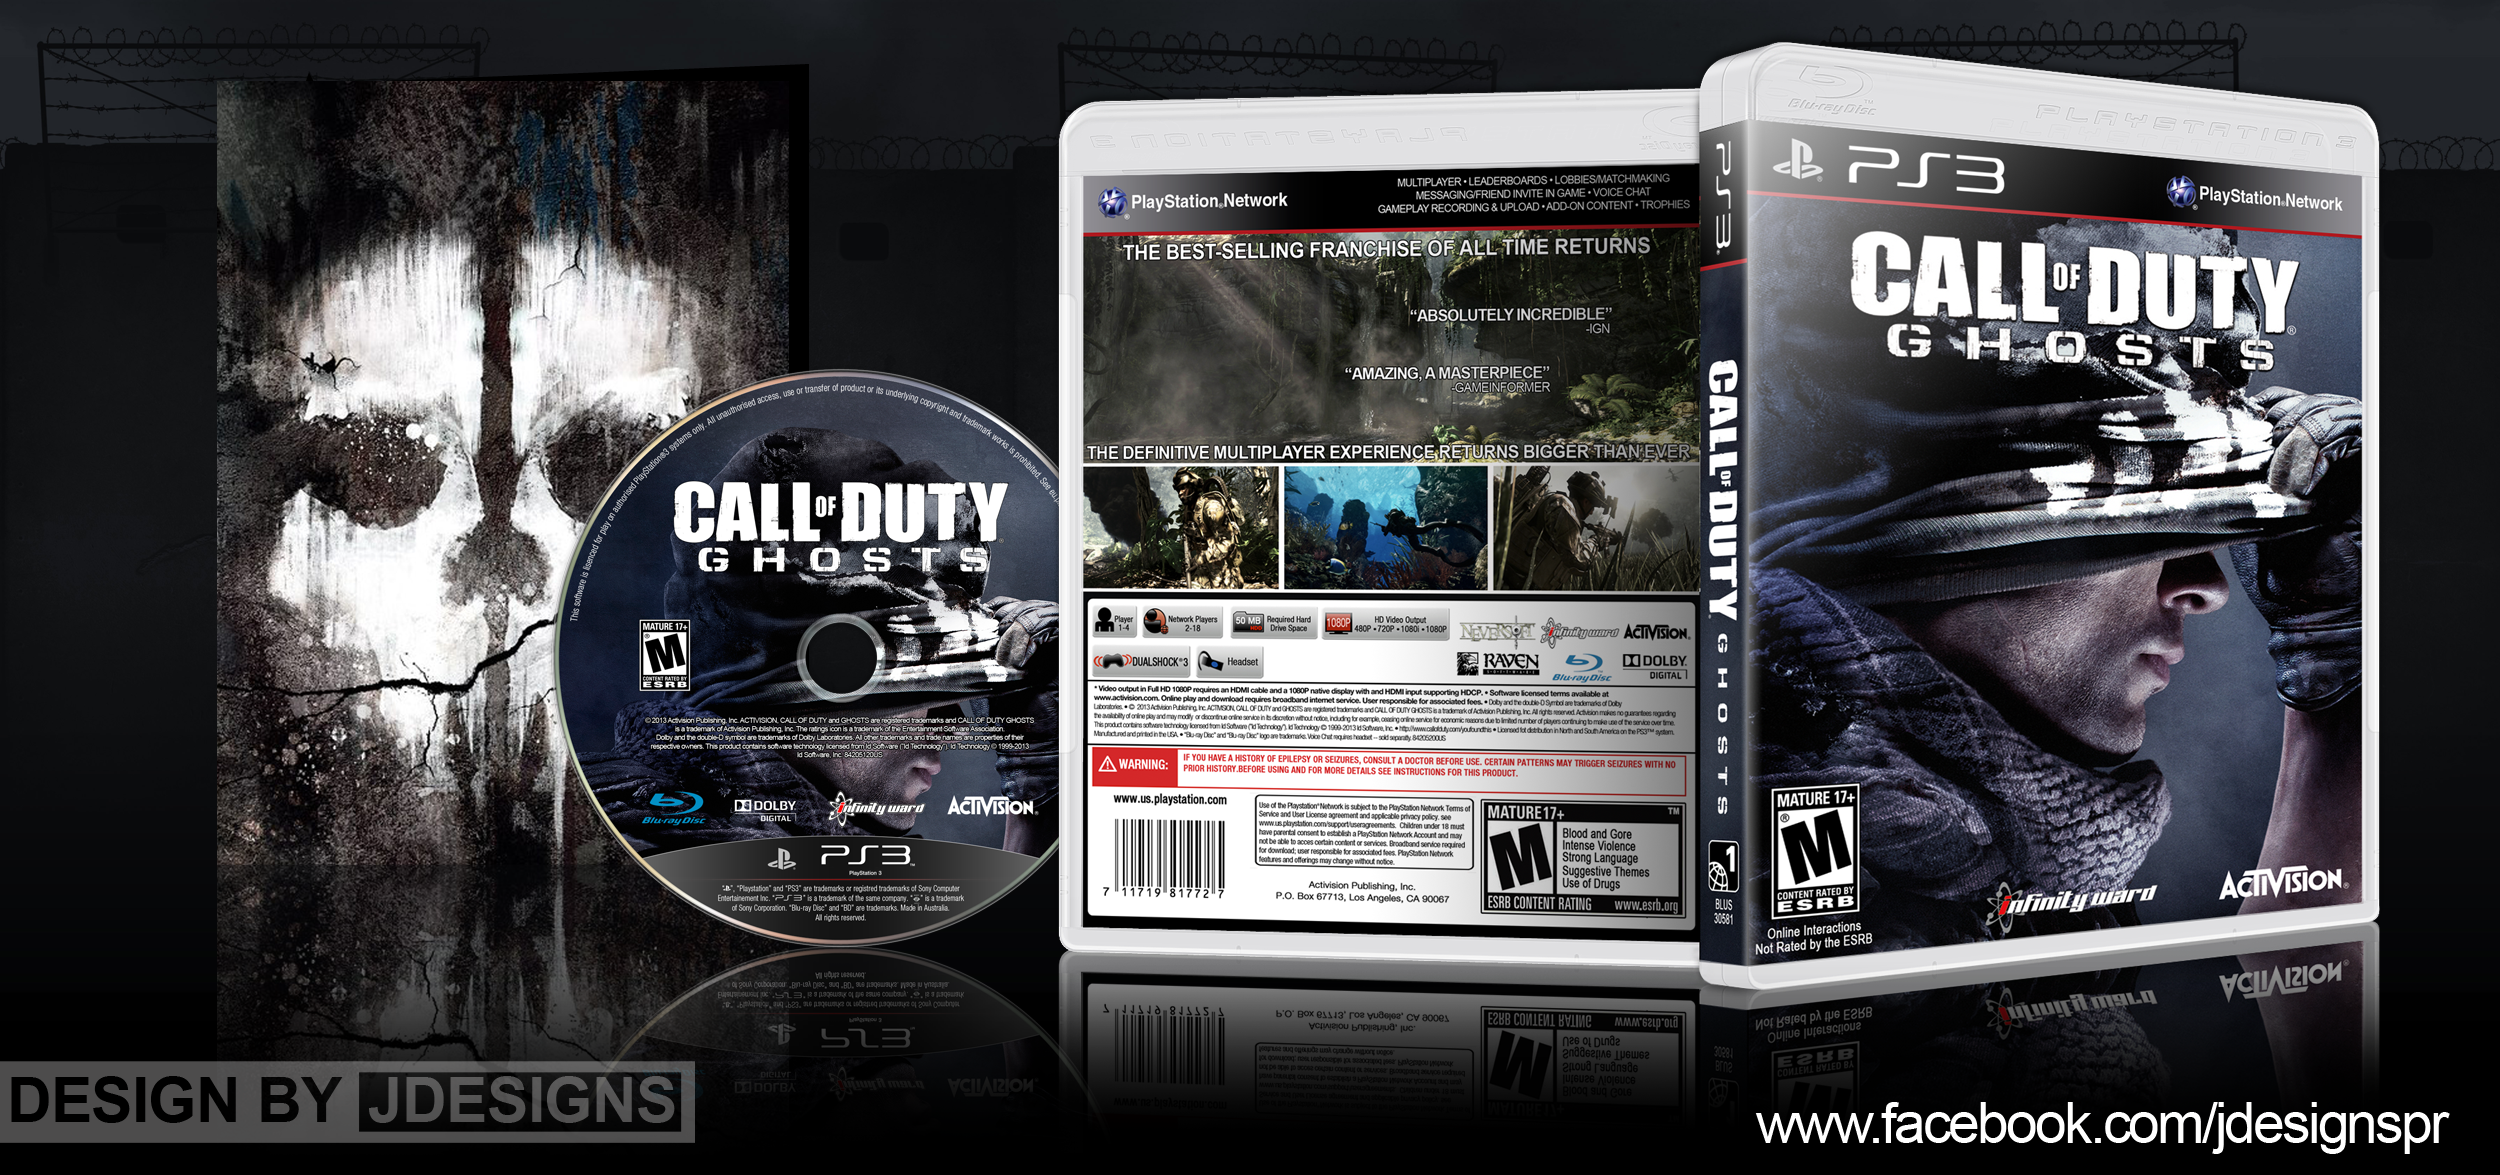 Call Of Duty: Ghost box cover